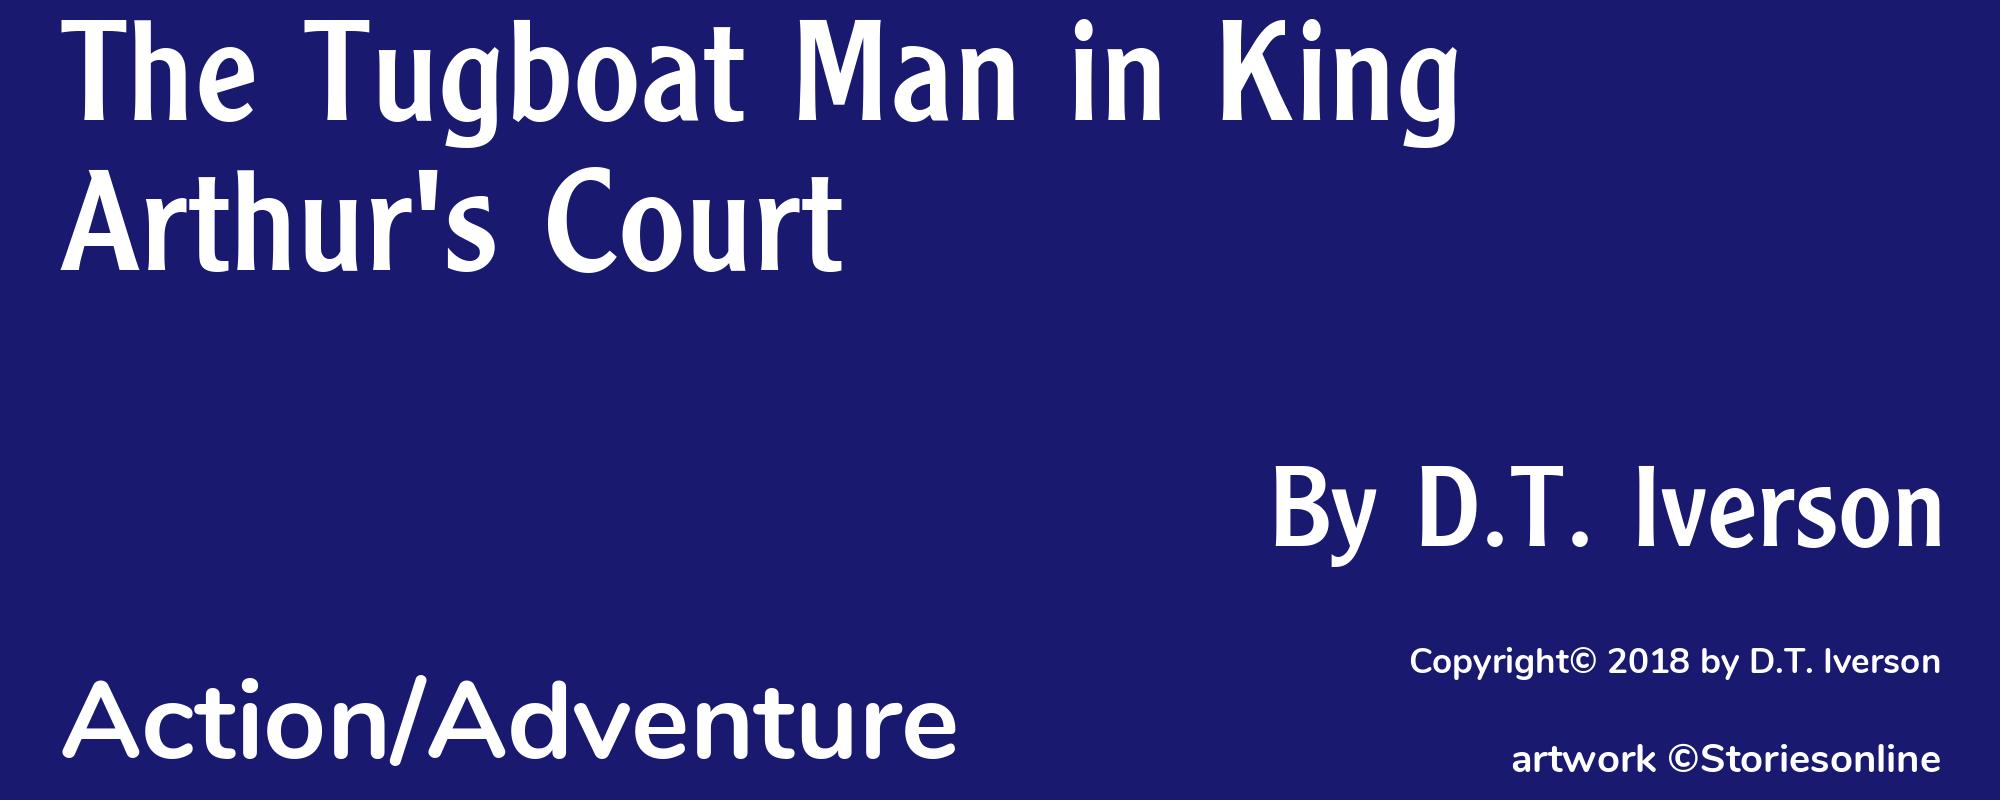 The Tugboat Man in King Arthur's Court - Cover